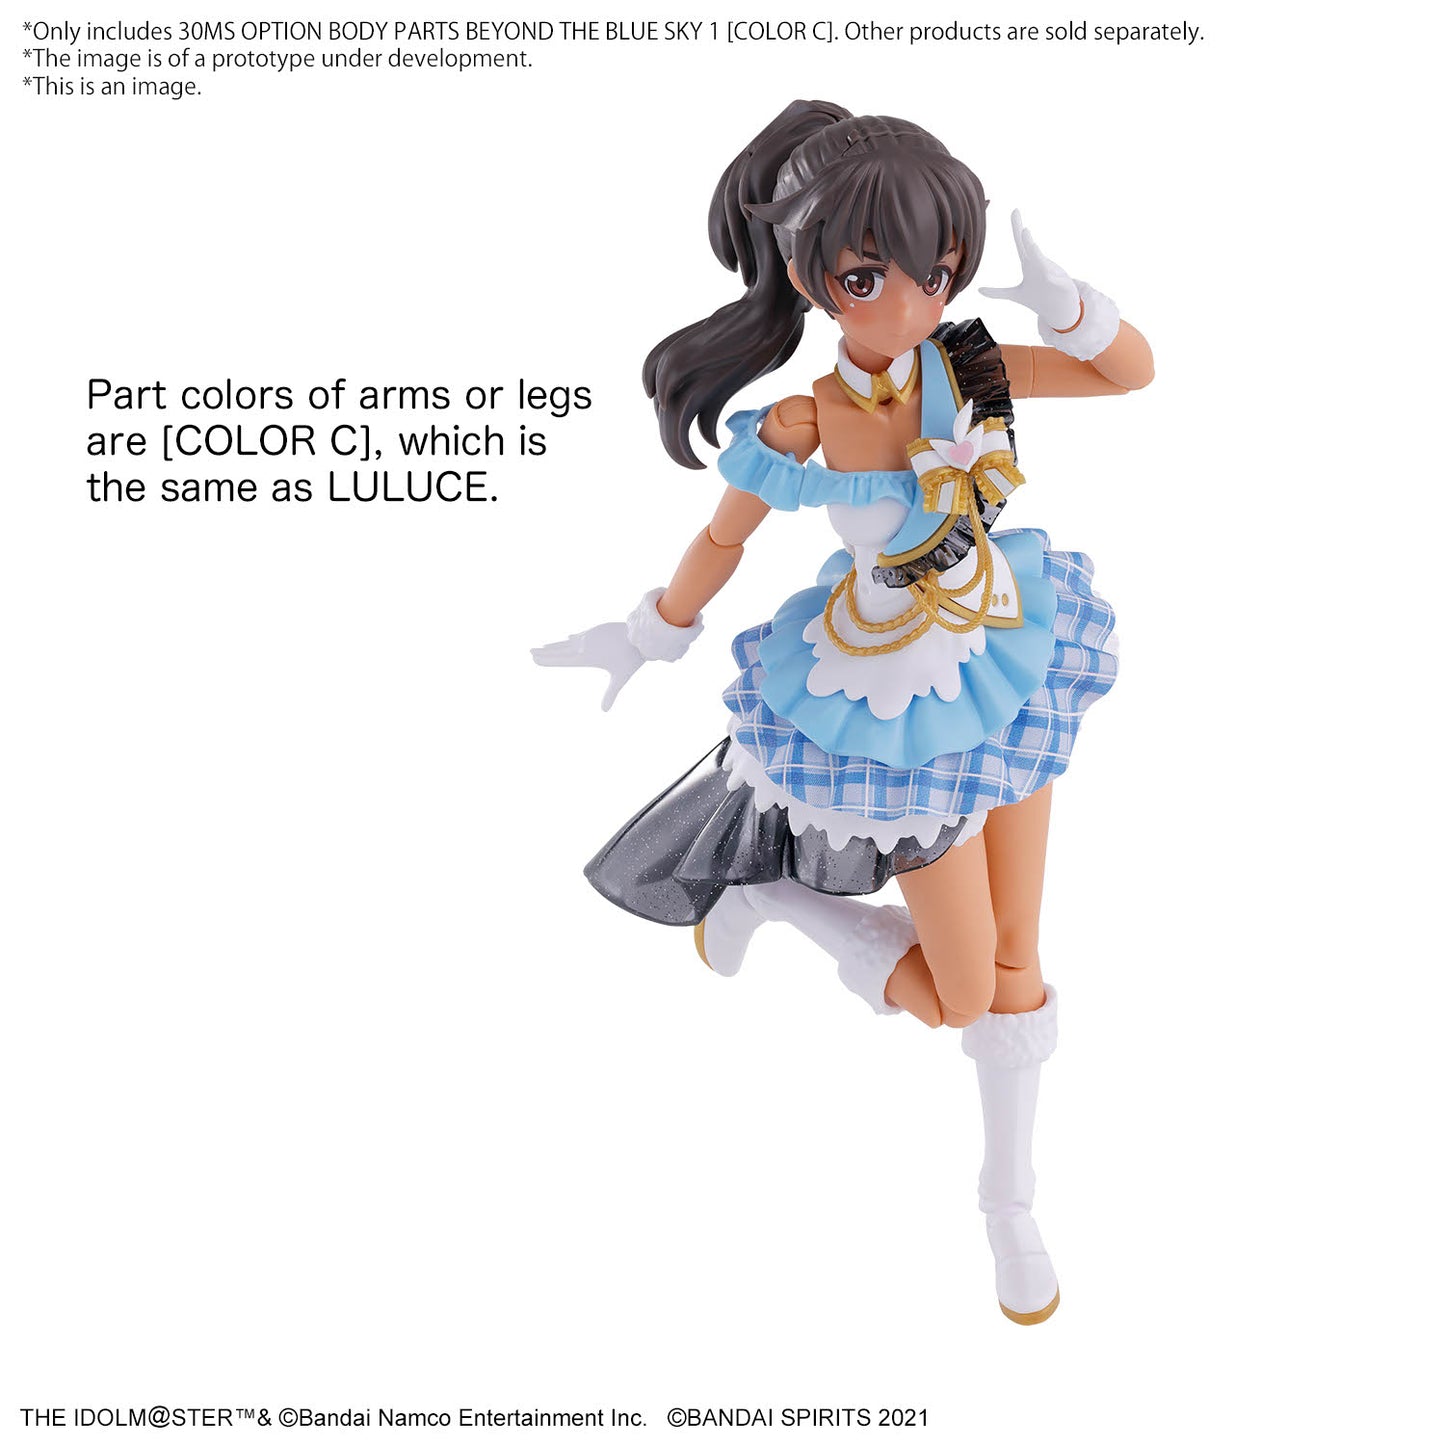 30MS - The Idolmaster Option Body Parts Beyond The Blue Sky 1 color C - Model Kit